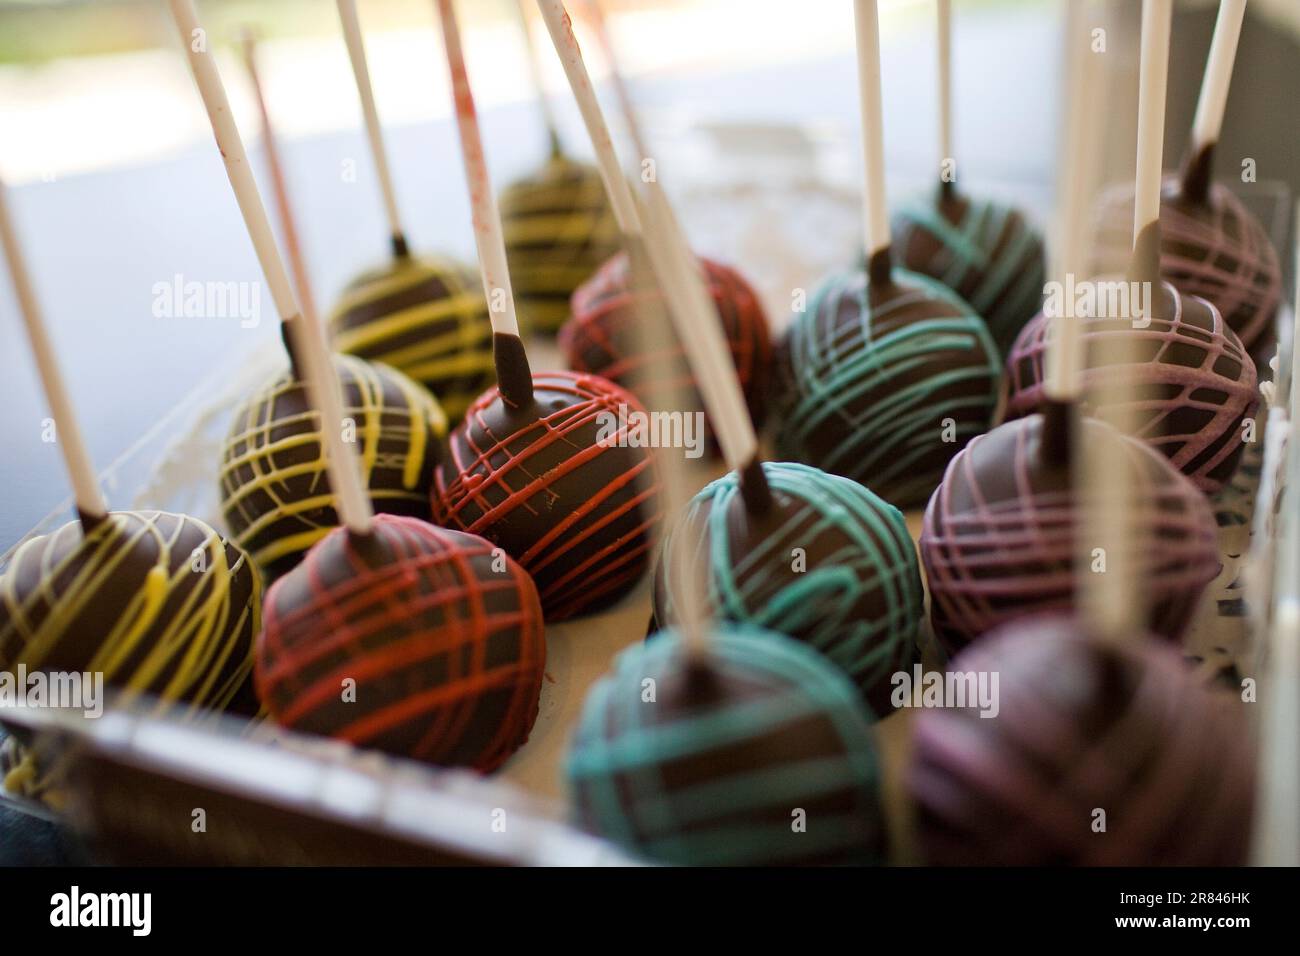 Close up, selective focus view of colorfully drizzled chocolate candy balls on sticks. Stock Photo